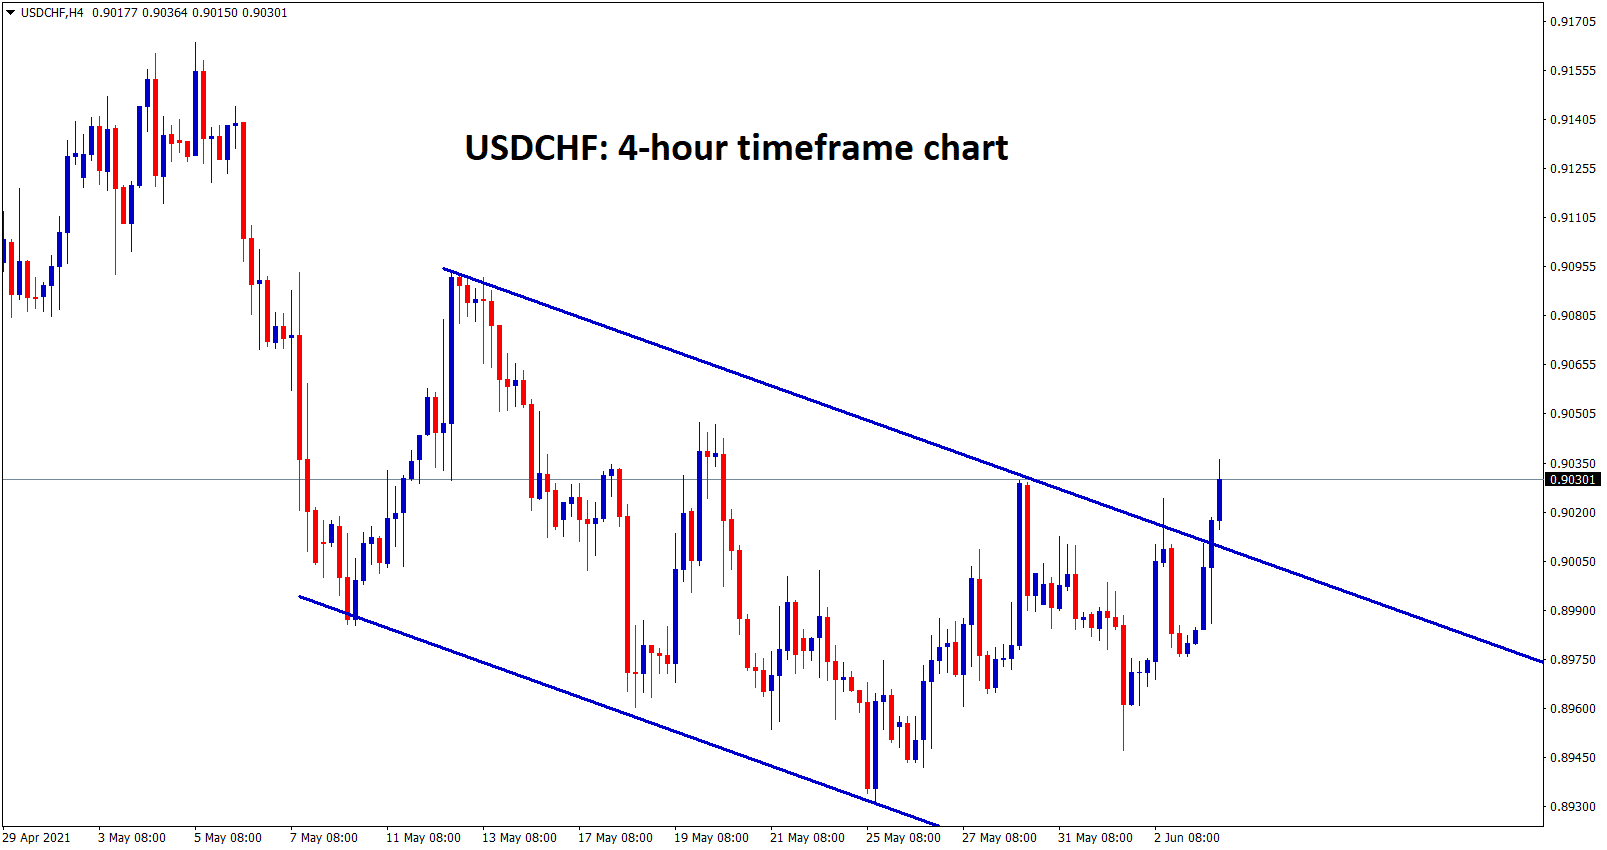 UDSCHF trying to break the downtrend channel range